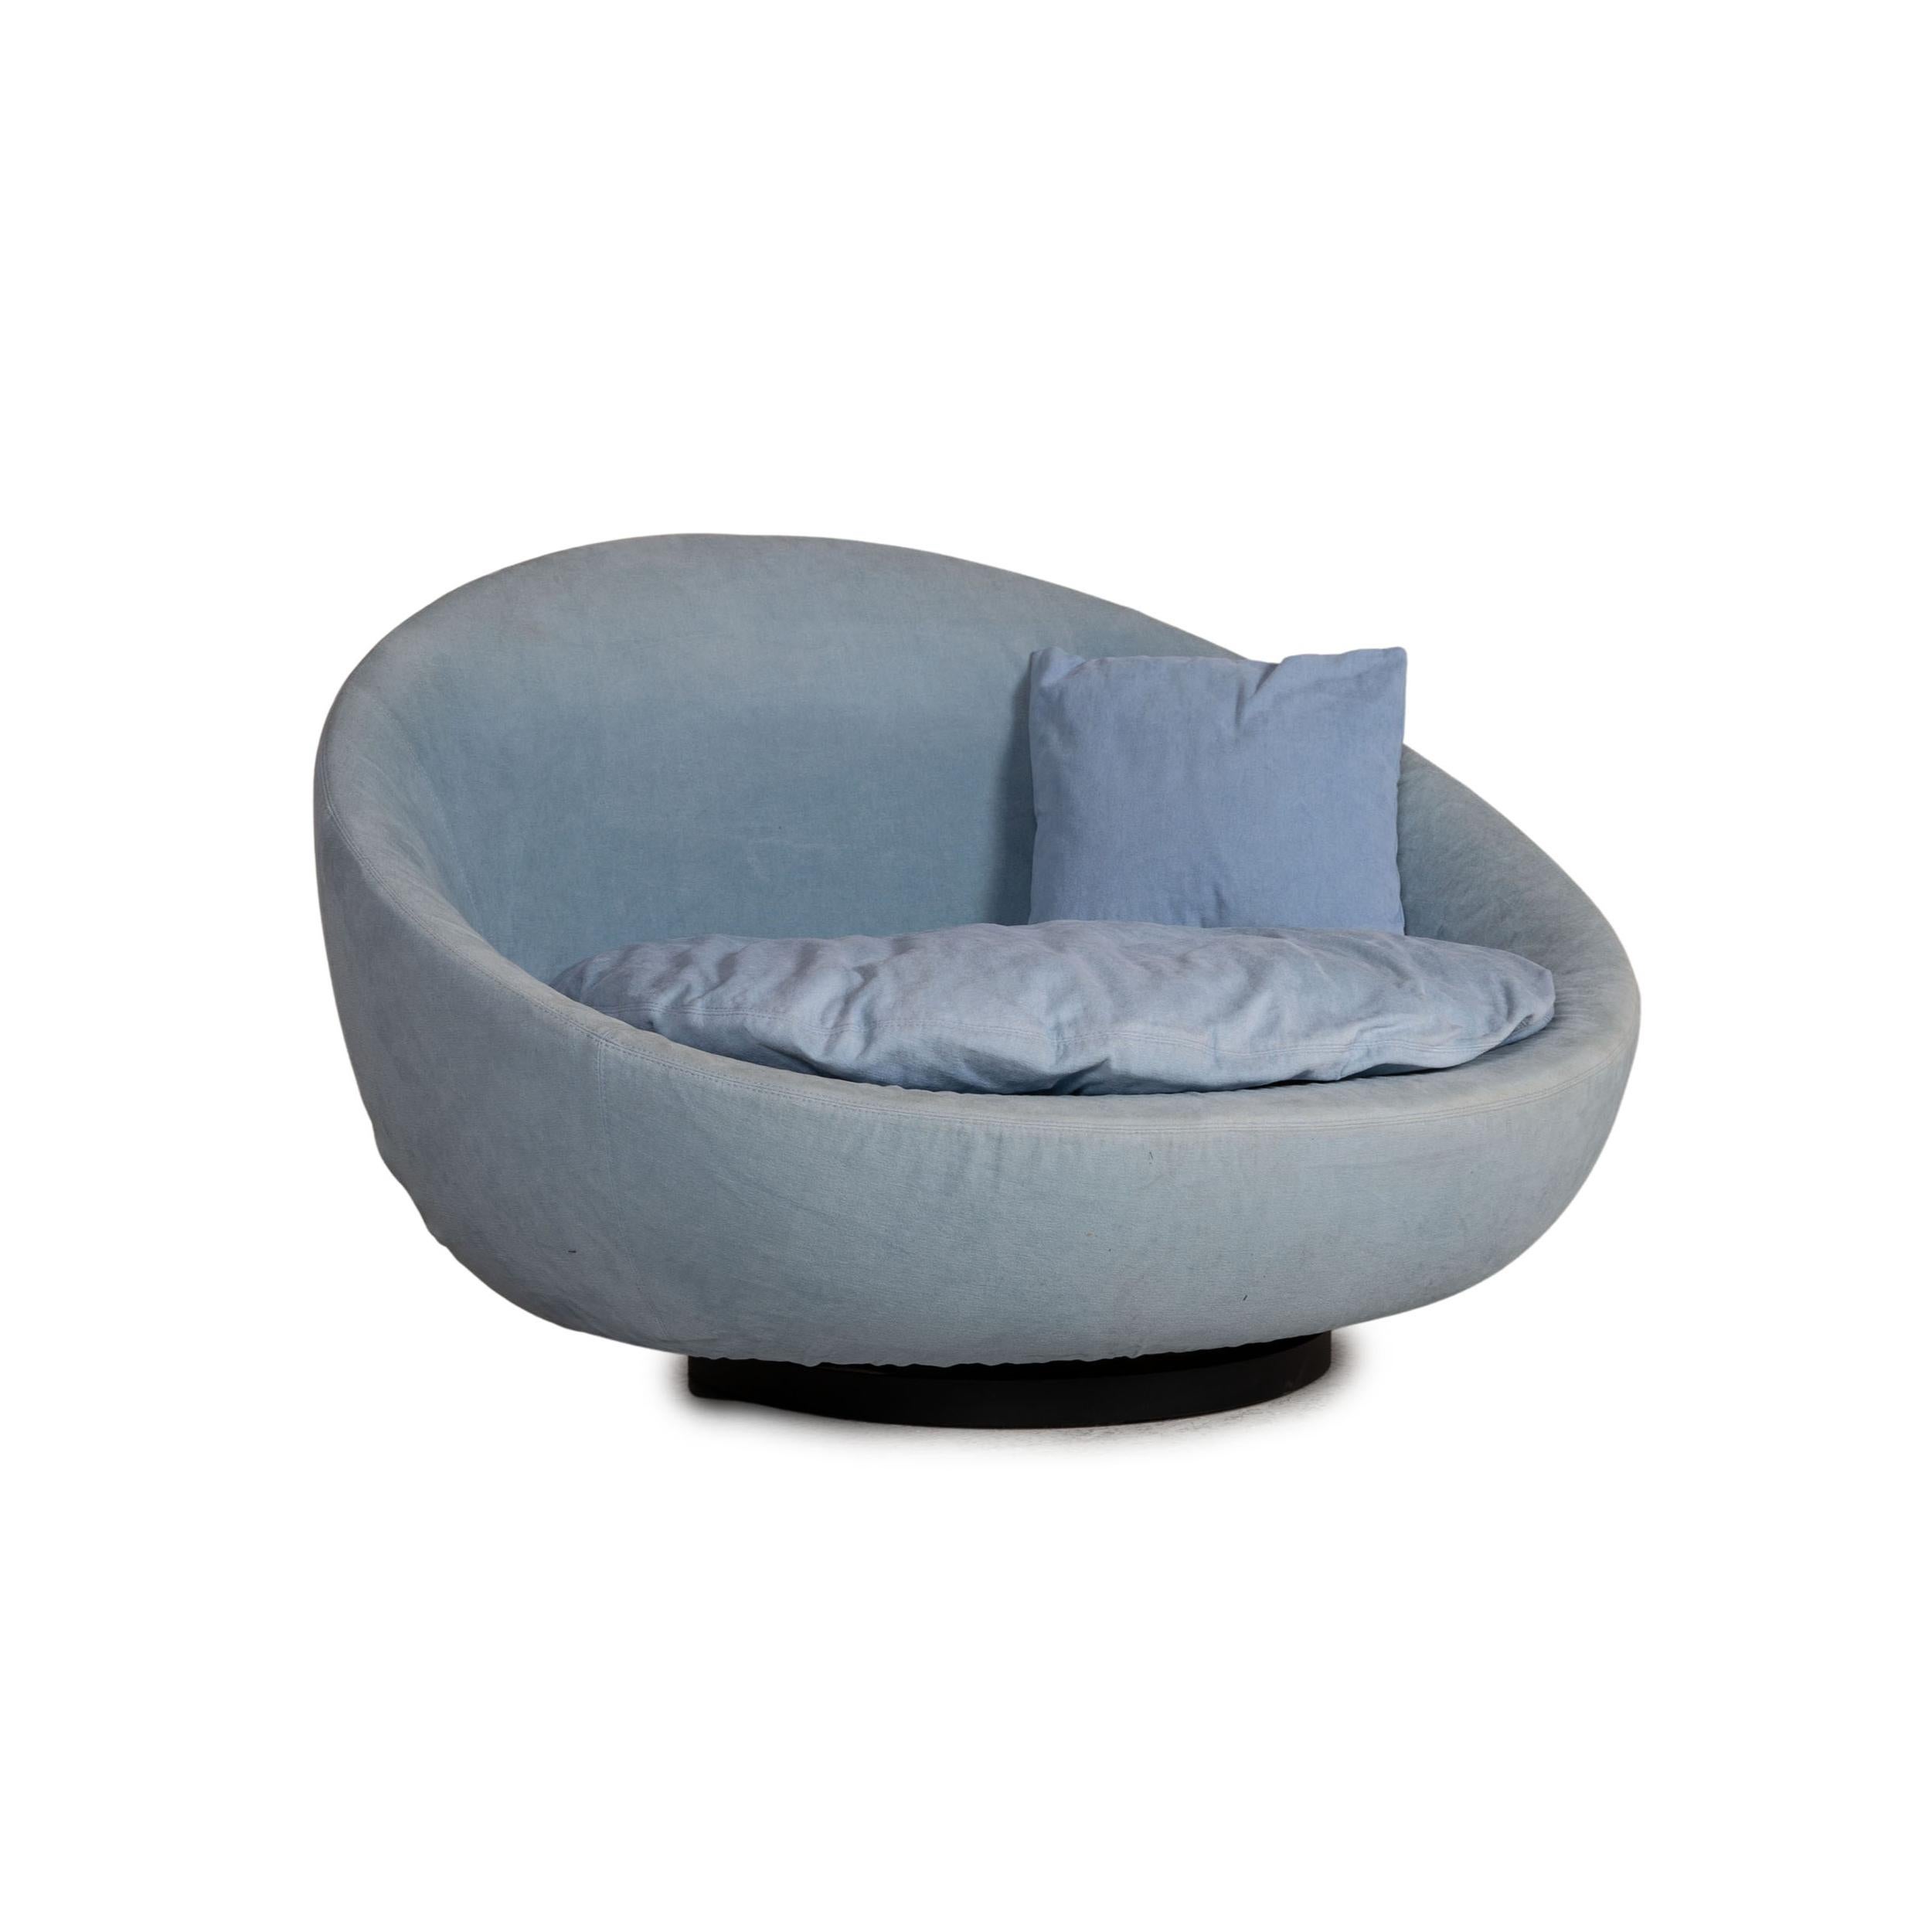 Contemporary Désirée Lacoon Island Fabric Sofa Blue Two-Seater Couch